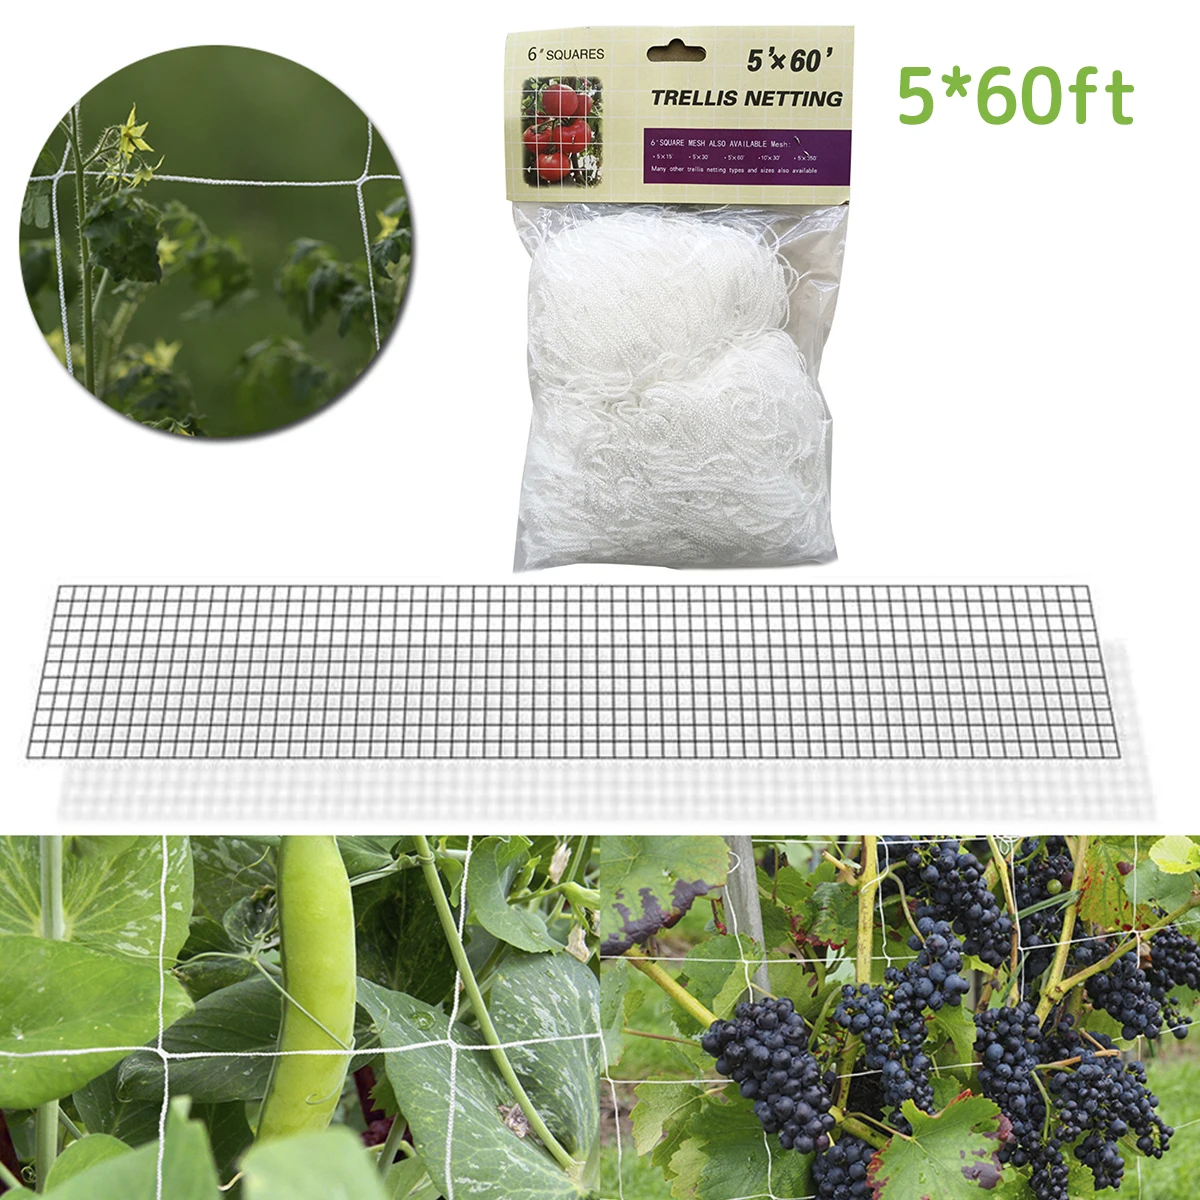 

5*60ft Plant Trellis Netting Plant Climbing Net with Square Mesh Plant Support Mesh for Climbing Plants Vegetables Fruits Flower